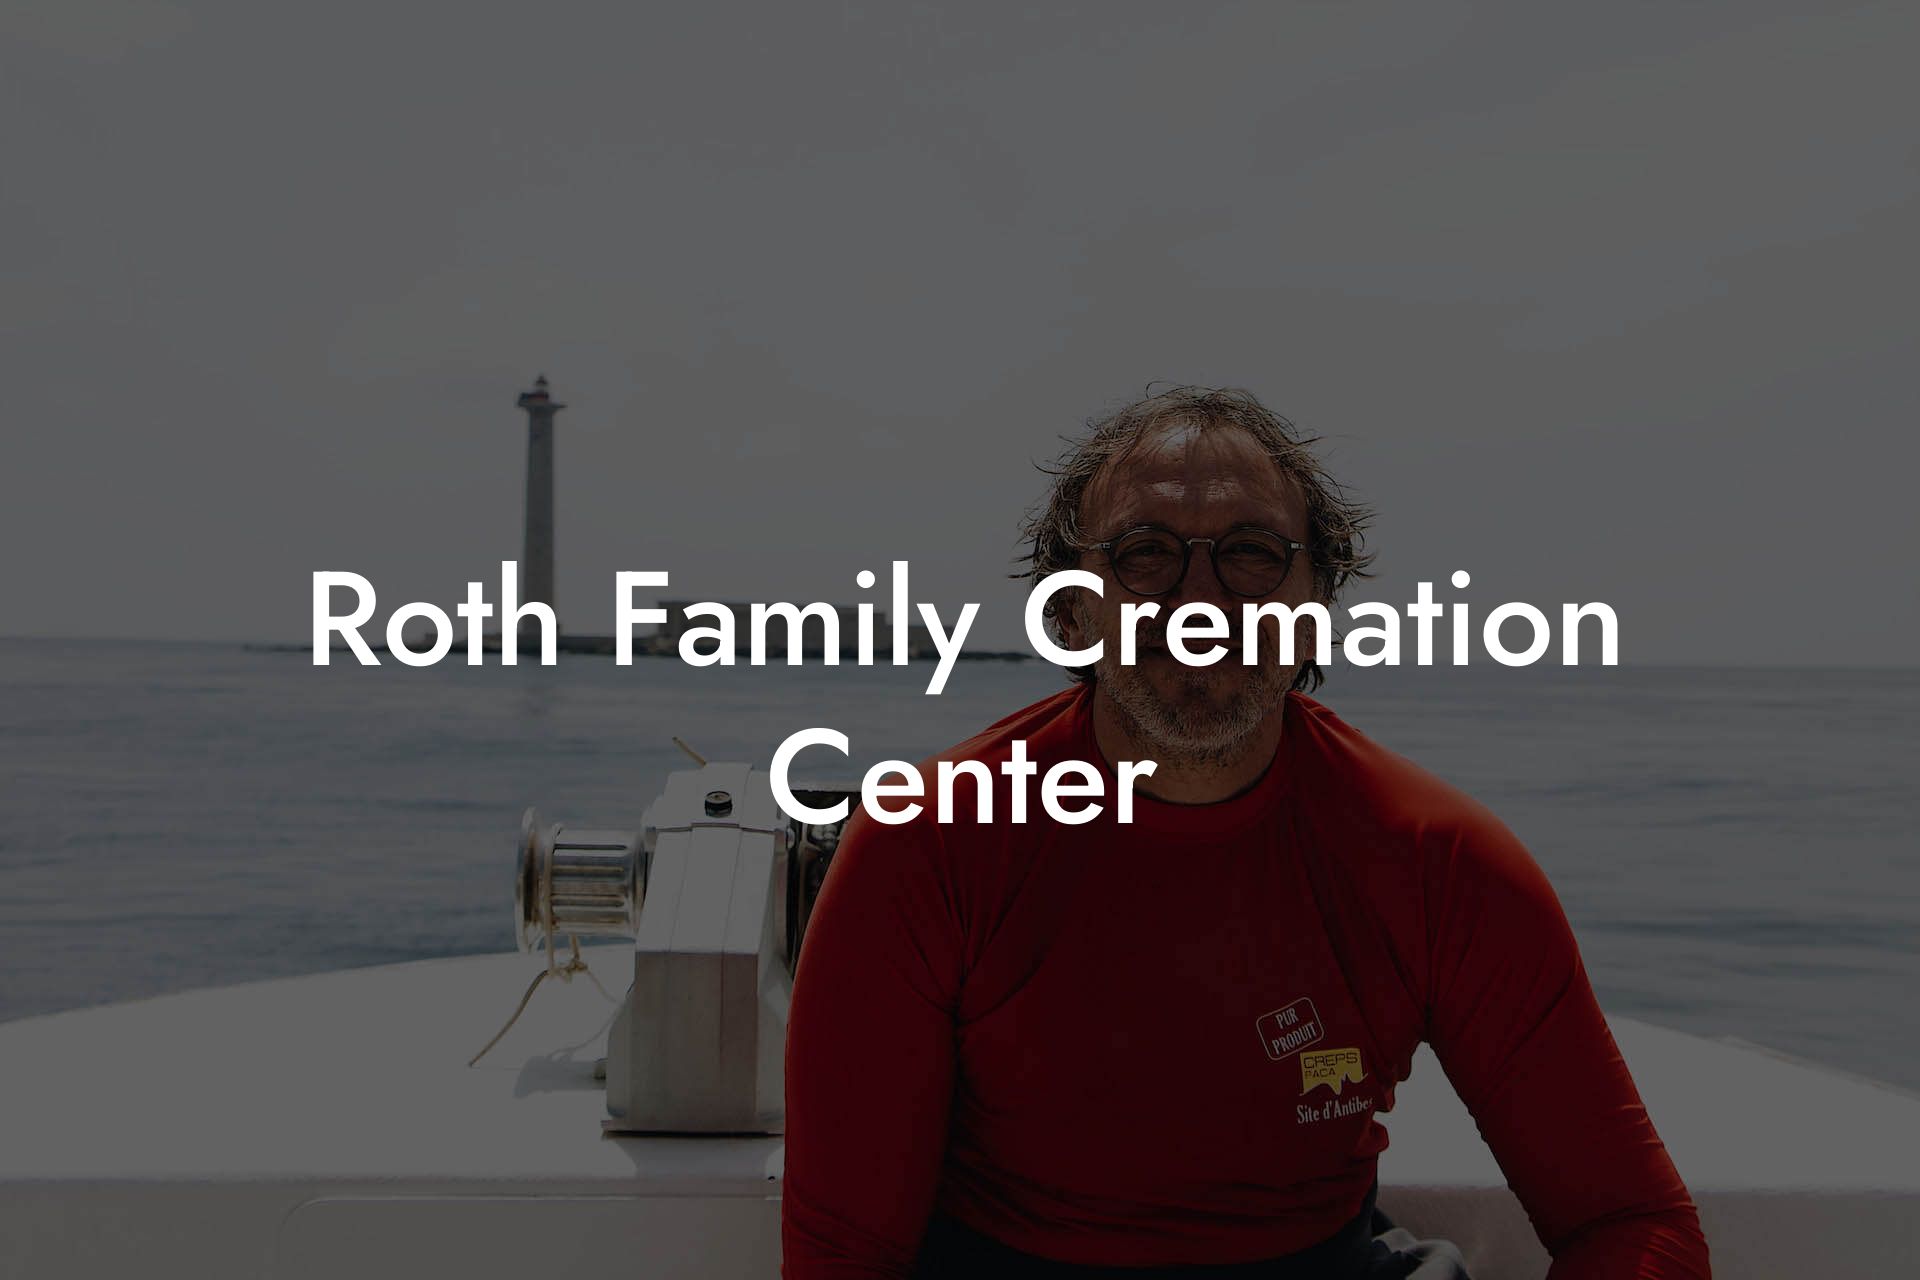 Roth Family Cremation Center